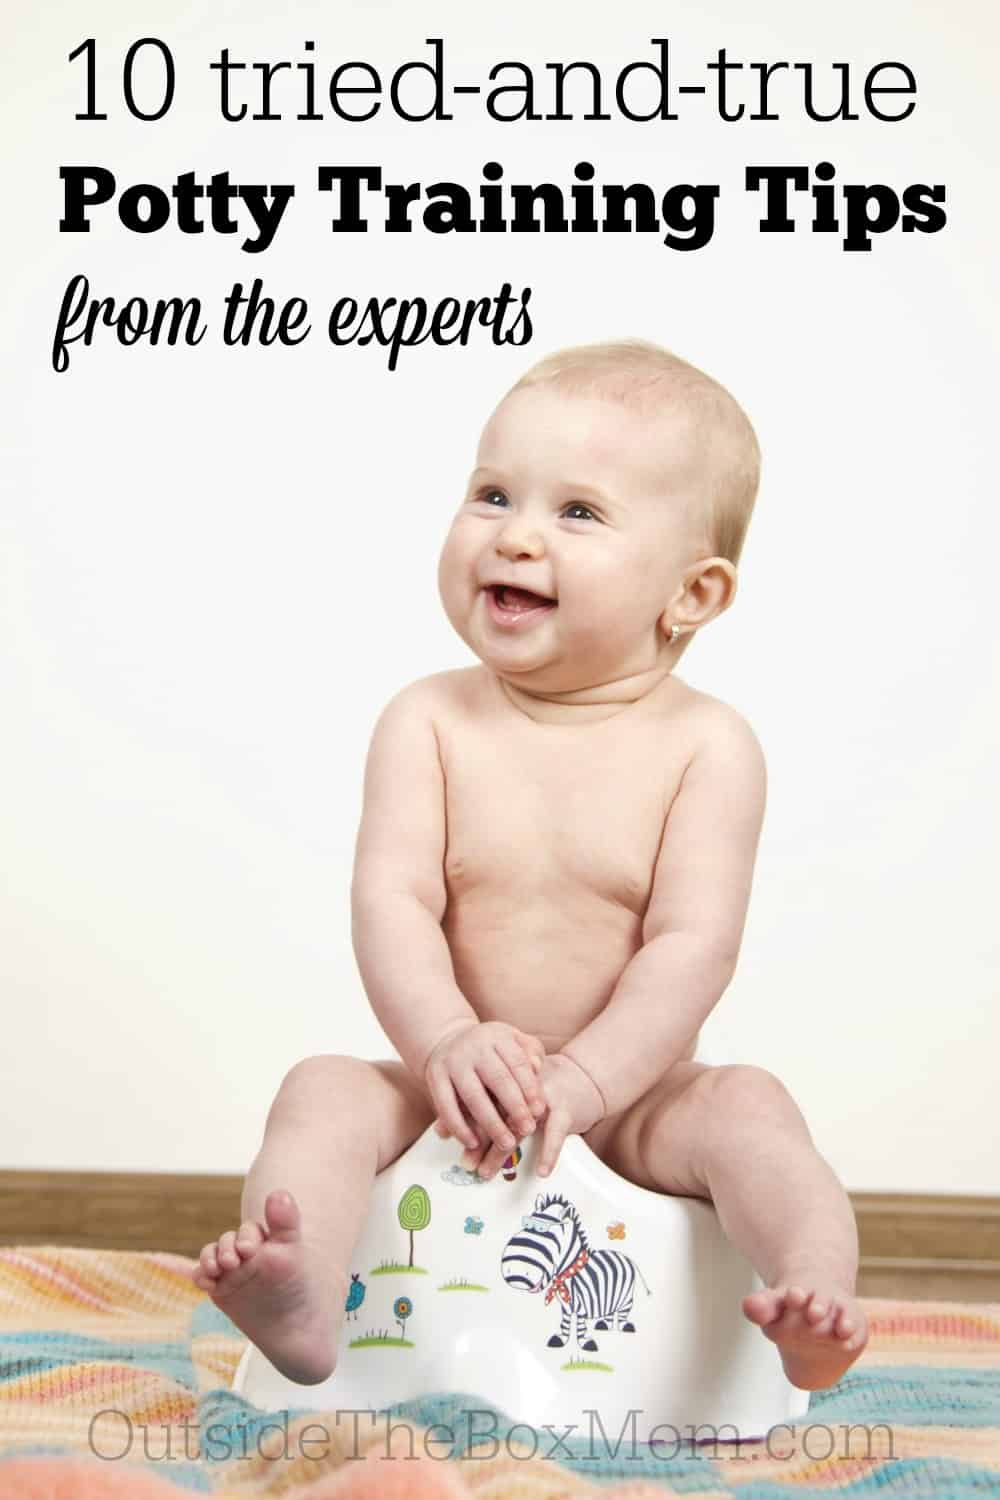 Are you looking for potty training tips from moms who have been there? What about expert advice from a potty training expert? I've got 10 potty training tips that are sure to work for you and your family.